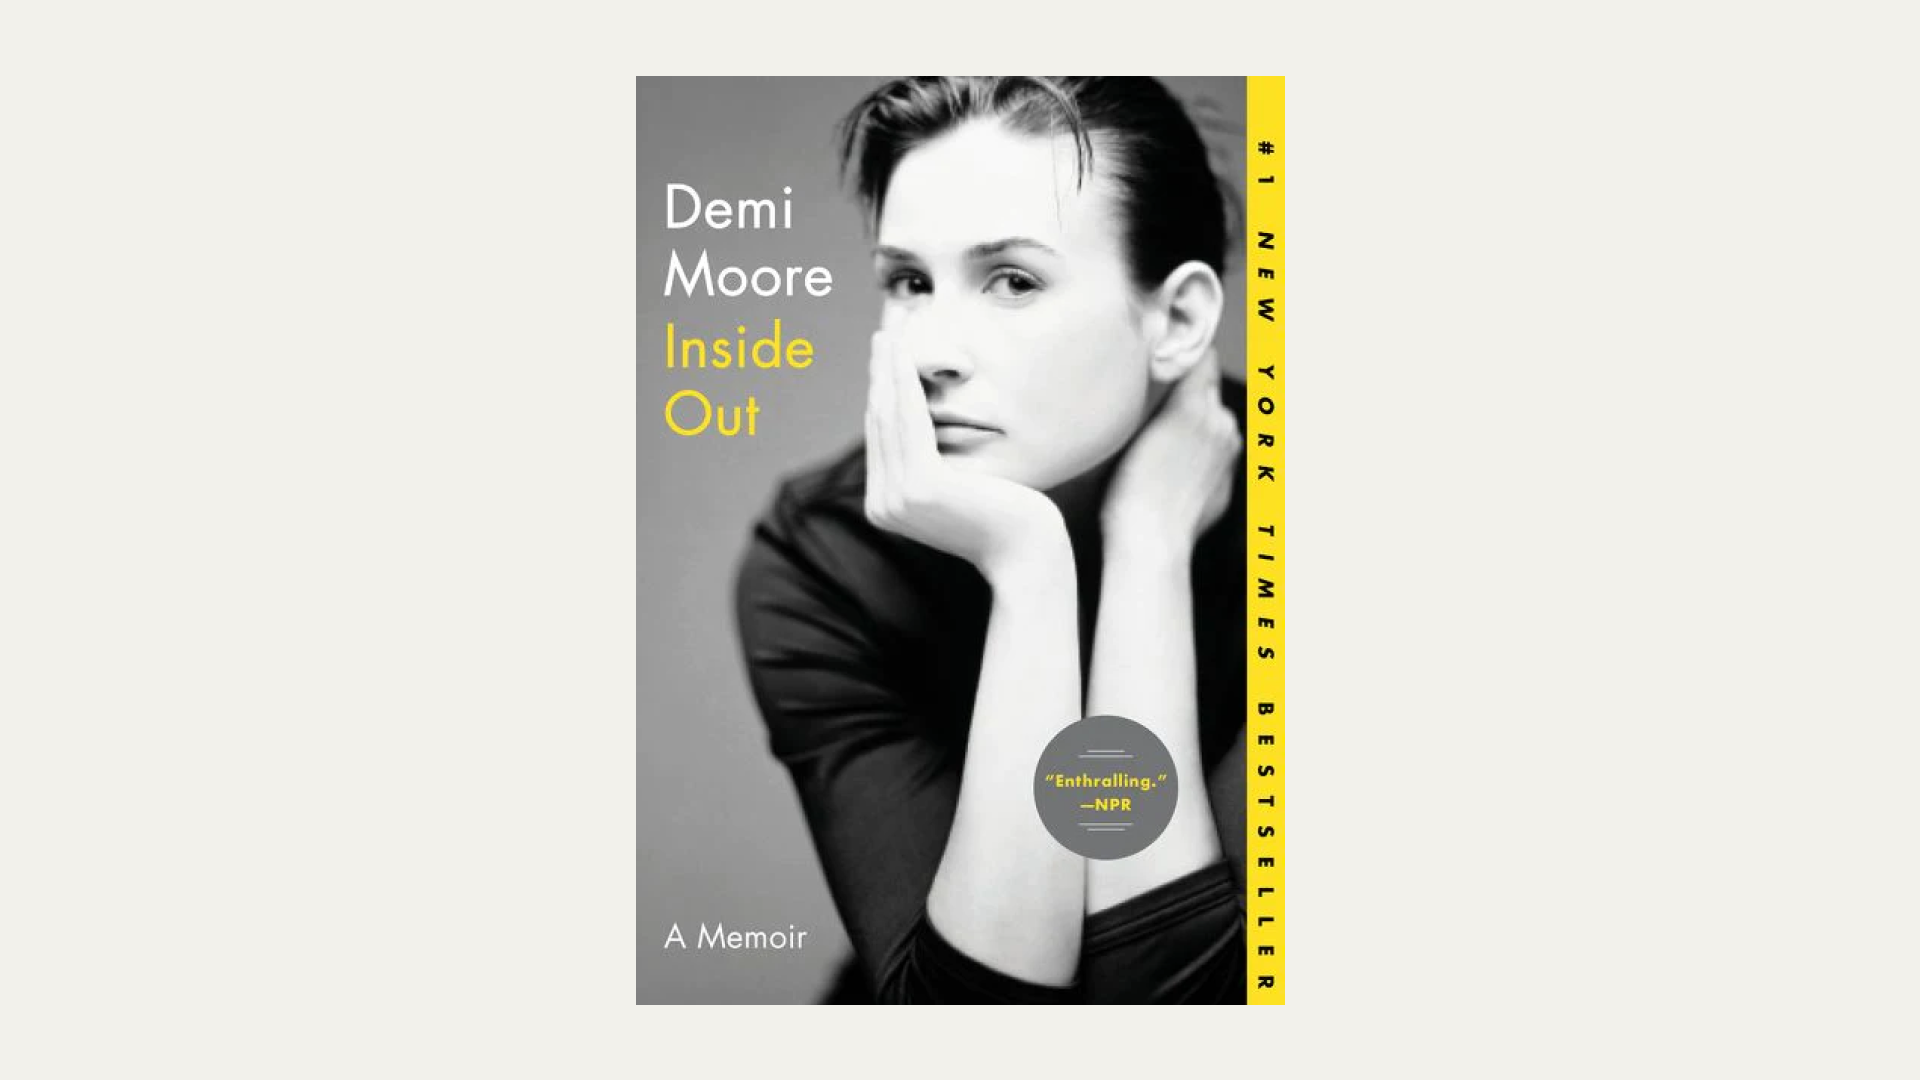 "Inside Out" by Demi Moore